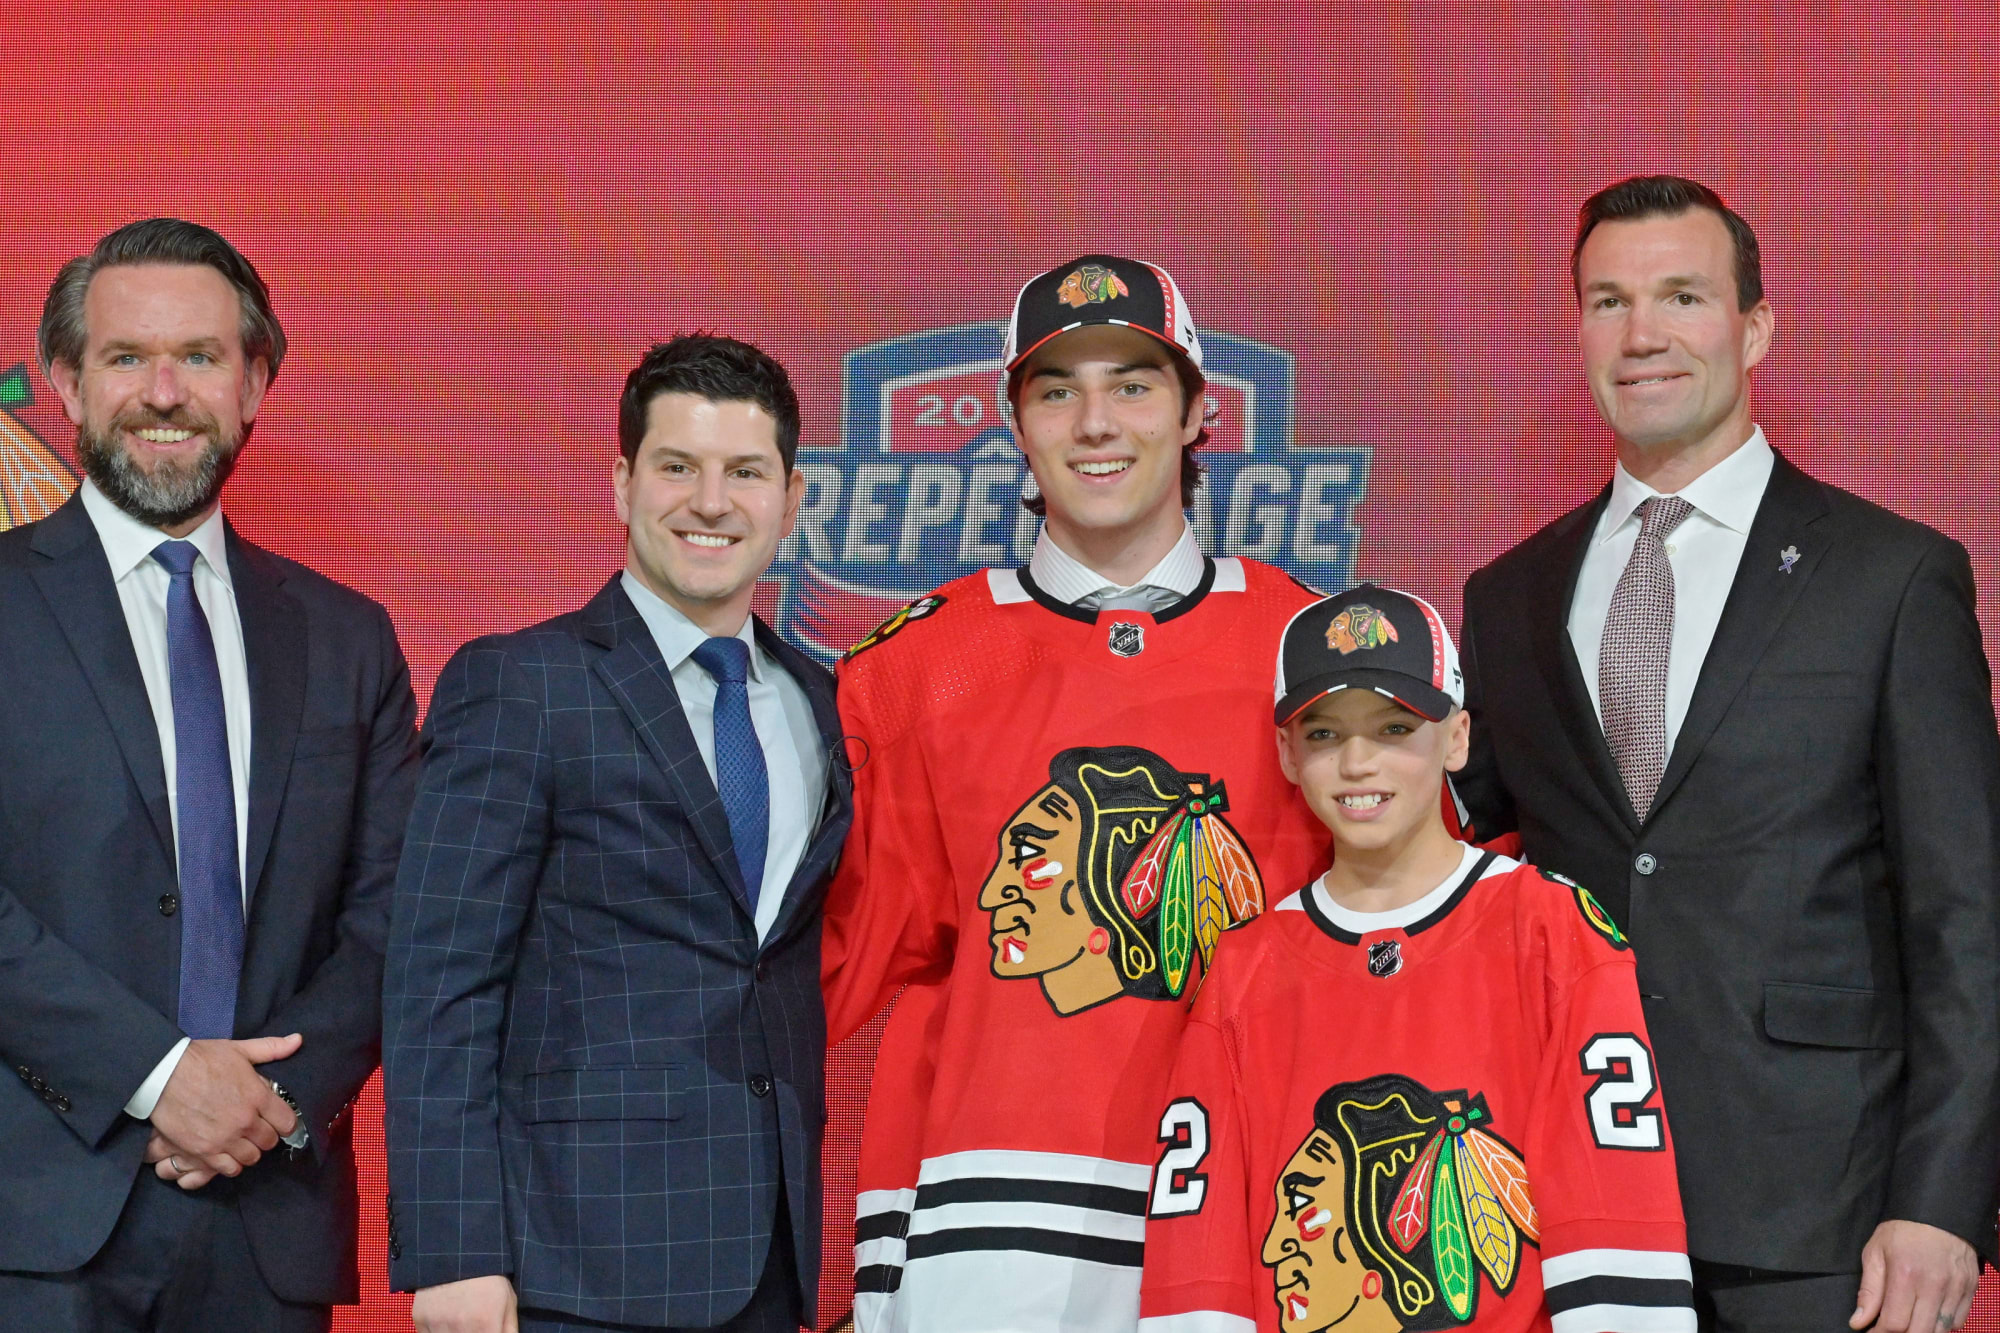 Michigan players go 1-2 in NHL draft – Macomb Daily